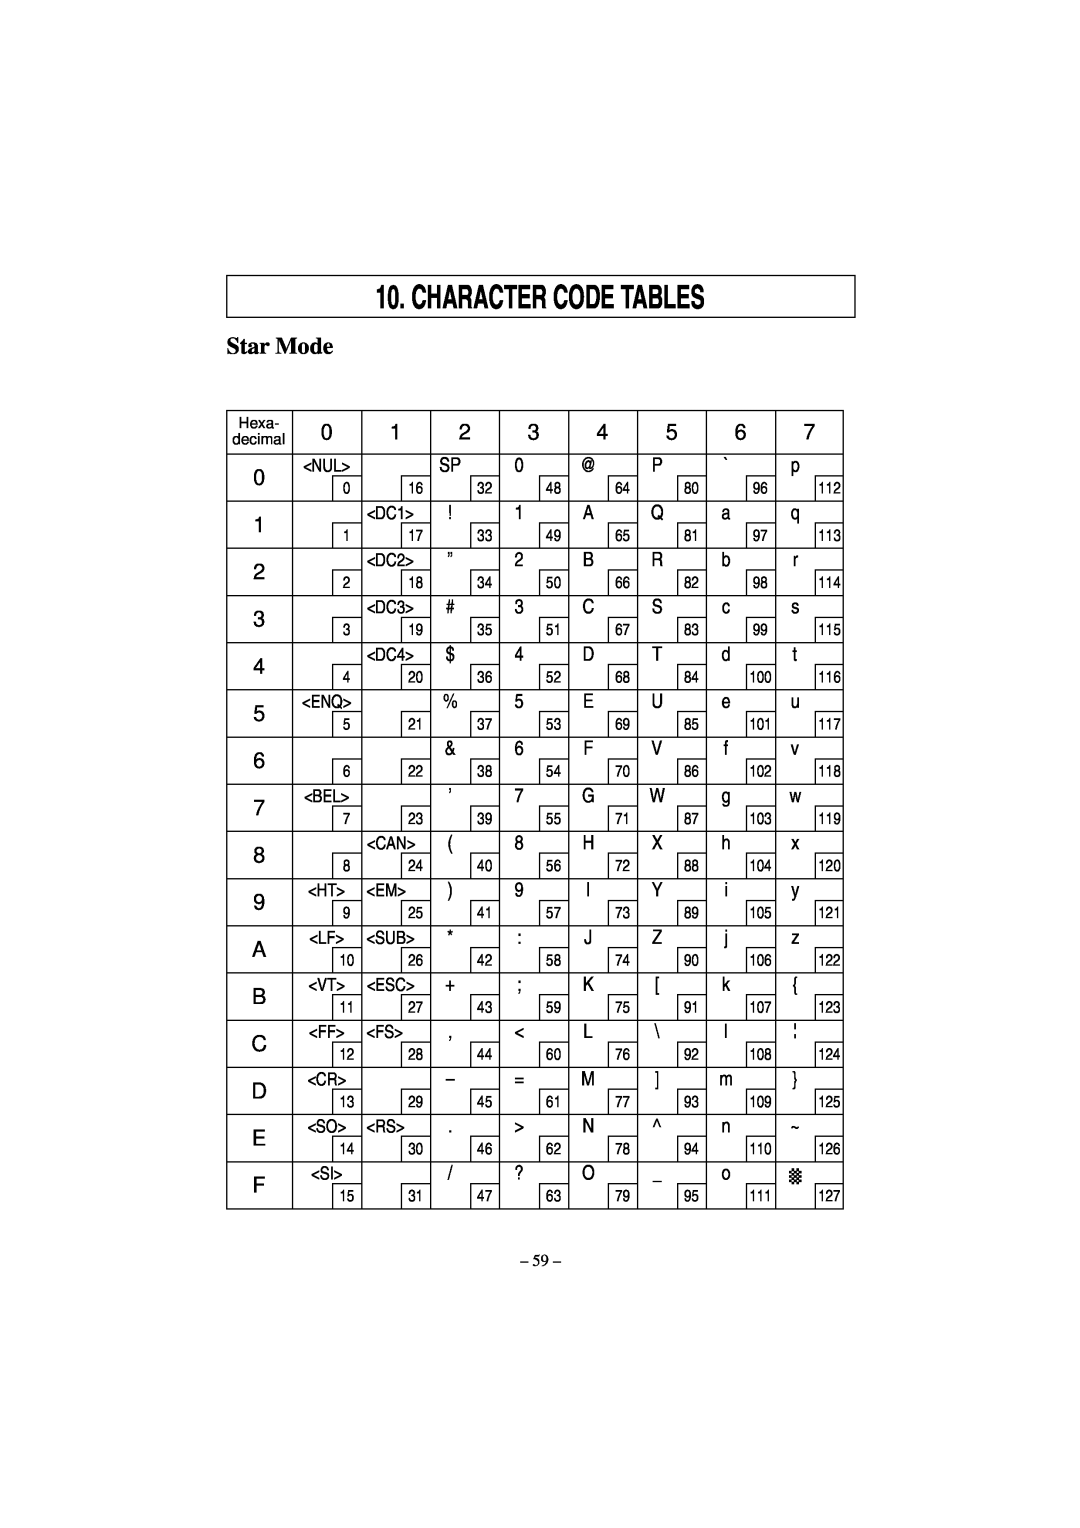 Star Micronics RS232 manual Character Code Tables, Star Mode 